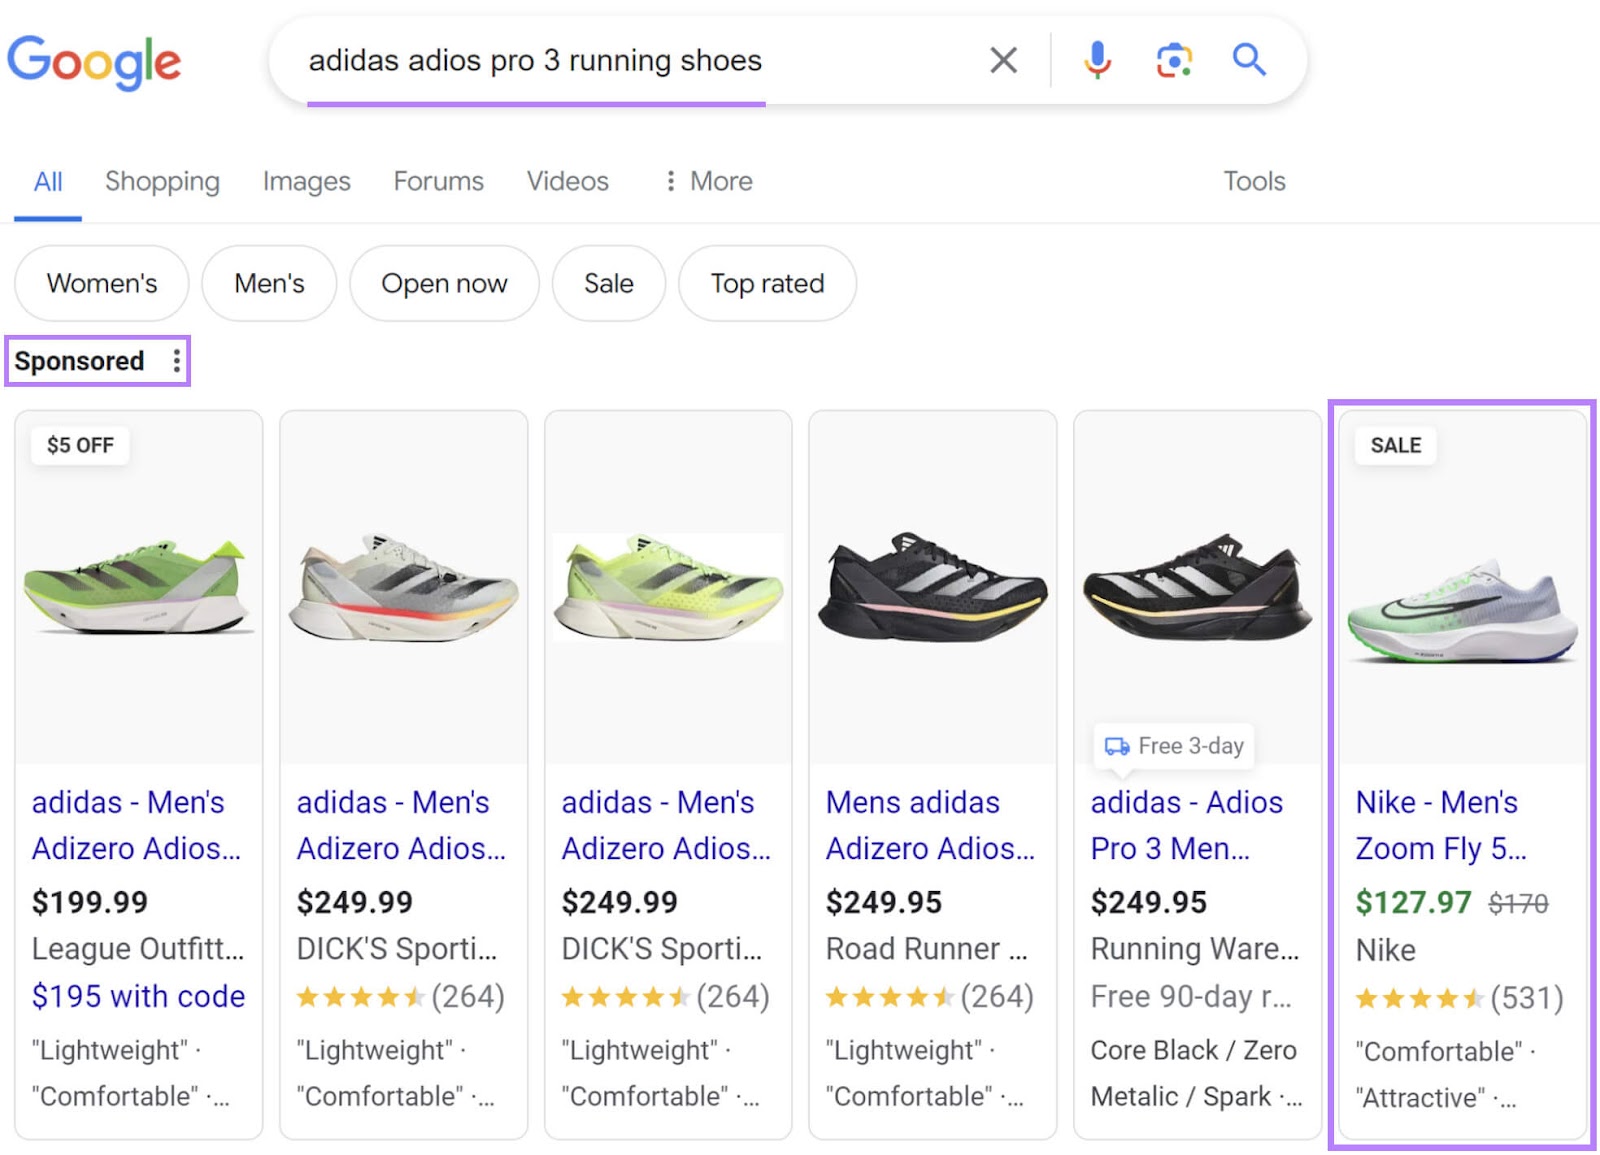 Google SERP showing various sponsored shopping ads for different models of Adidas running shoes and one pair of Nike running shoes.